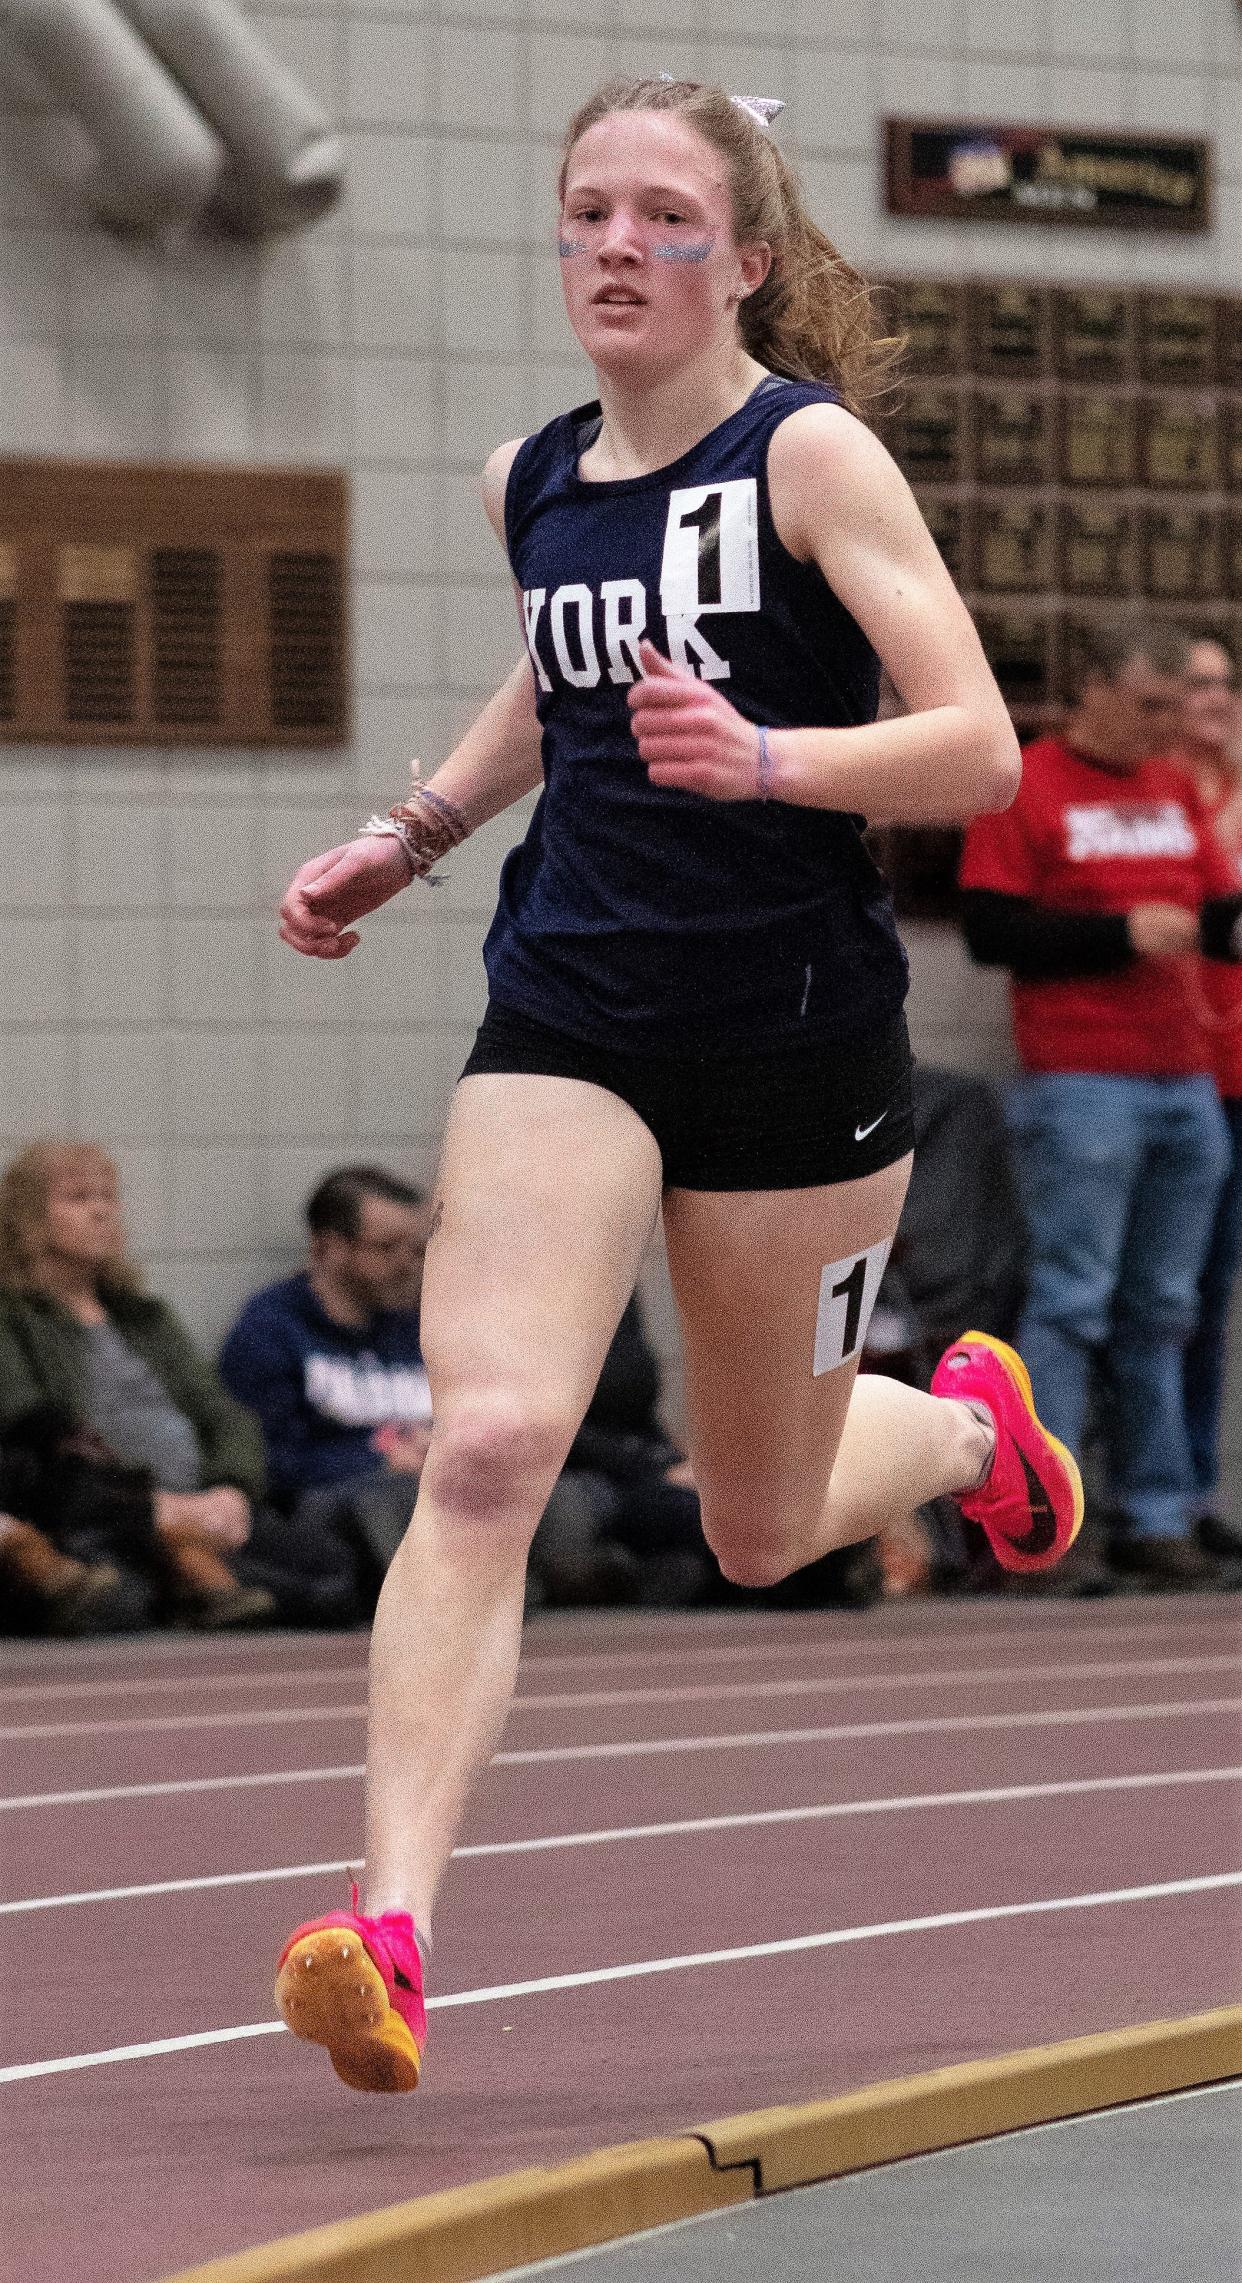 York's Cary Drake competes in the Maine Class B indoor state track championship Monday in February at Bates College in Lewiston, Maine. Drake won the 800, mile and two-mile, helping the Wildcats to their first indoor state track title in 13 years.